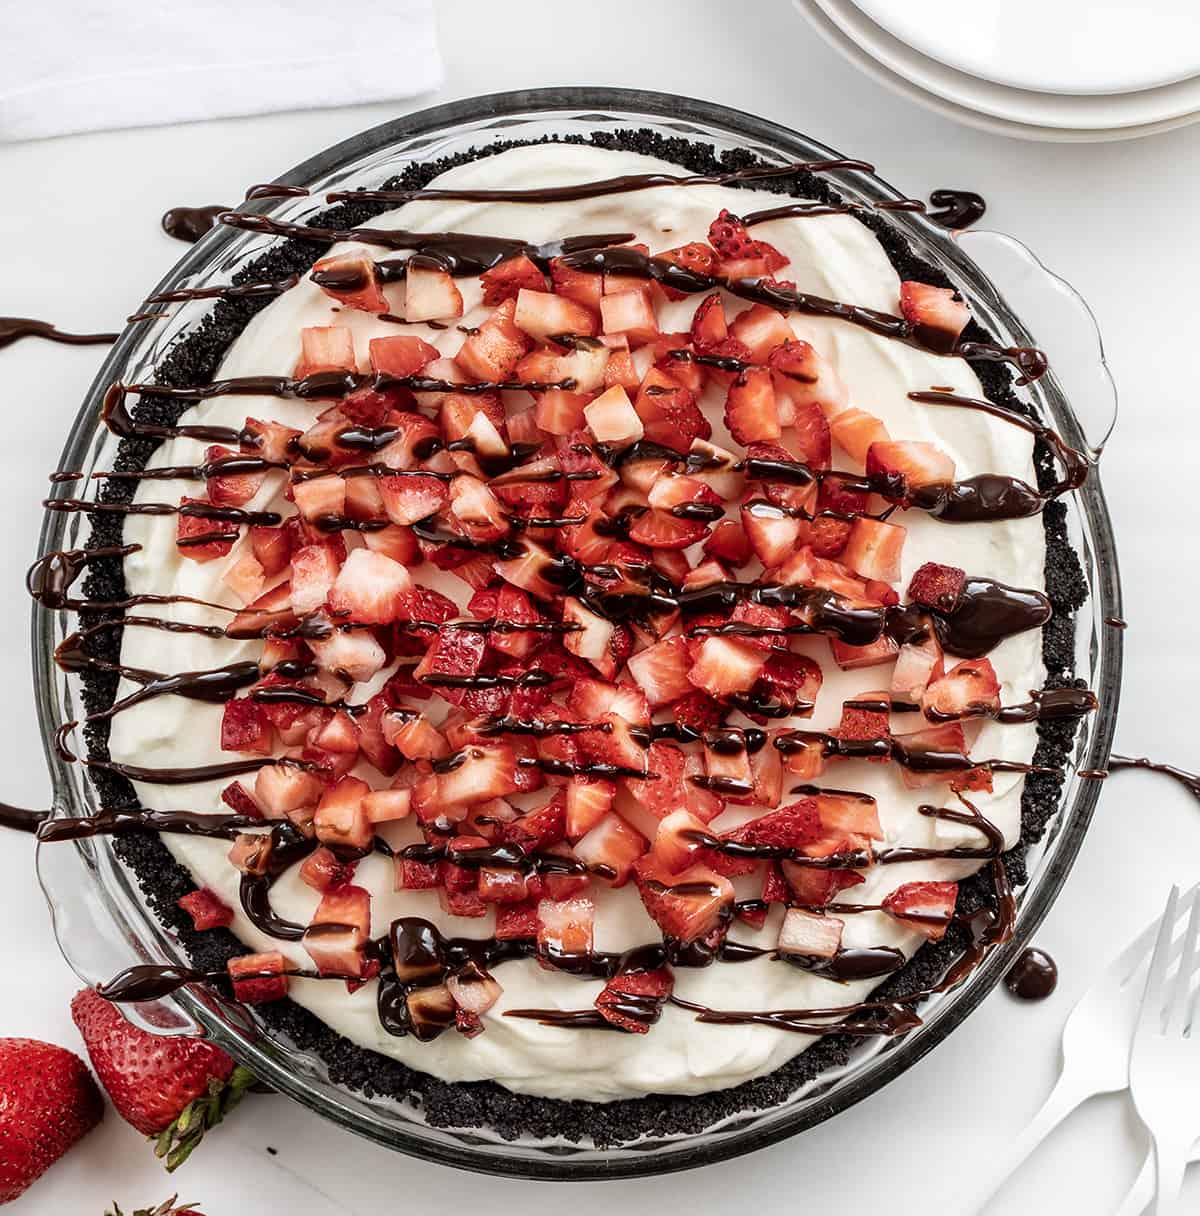 Overhead of a Chocolate Strawberry Marshmallow Pie on a White Counter with Hot Fudge Drizzle and Strawberries. 